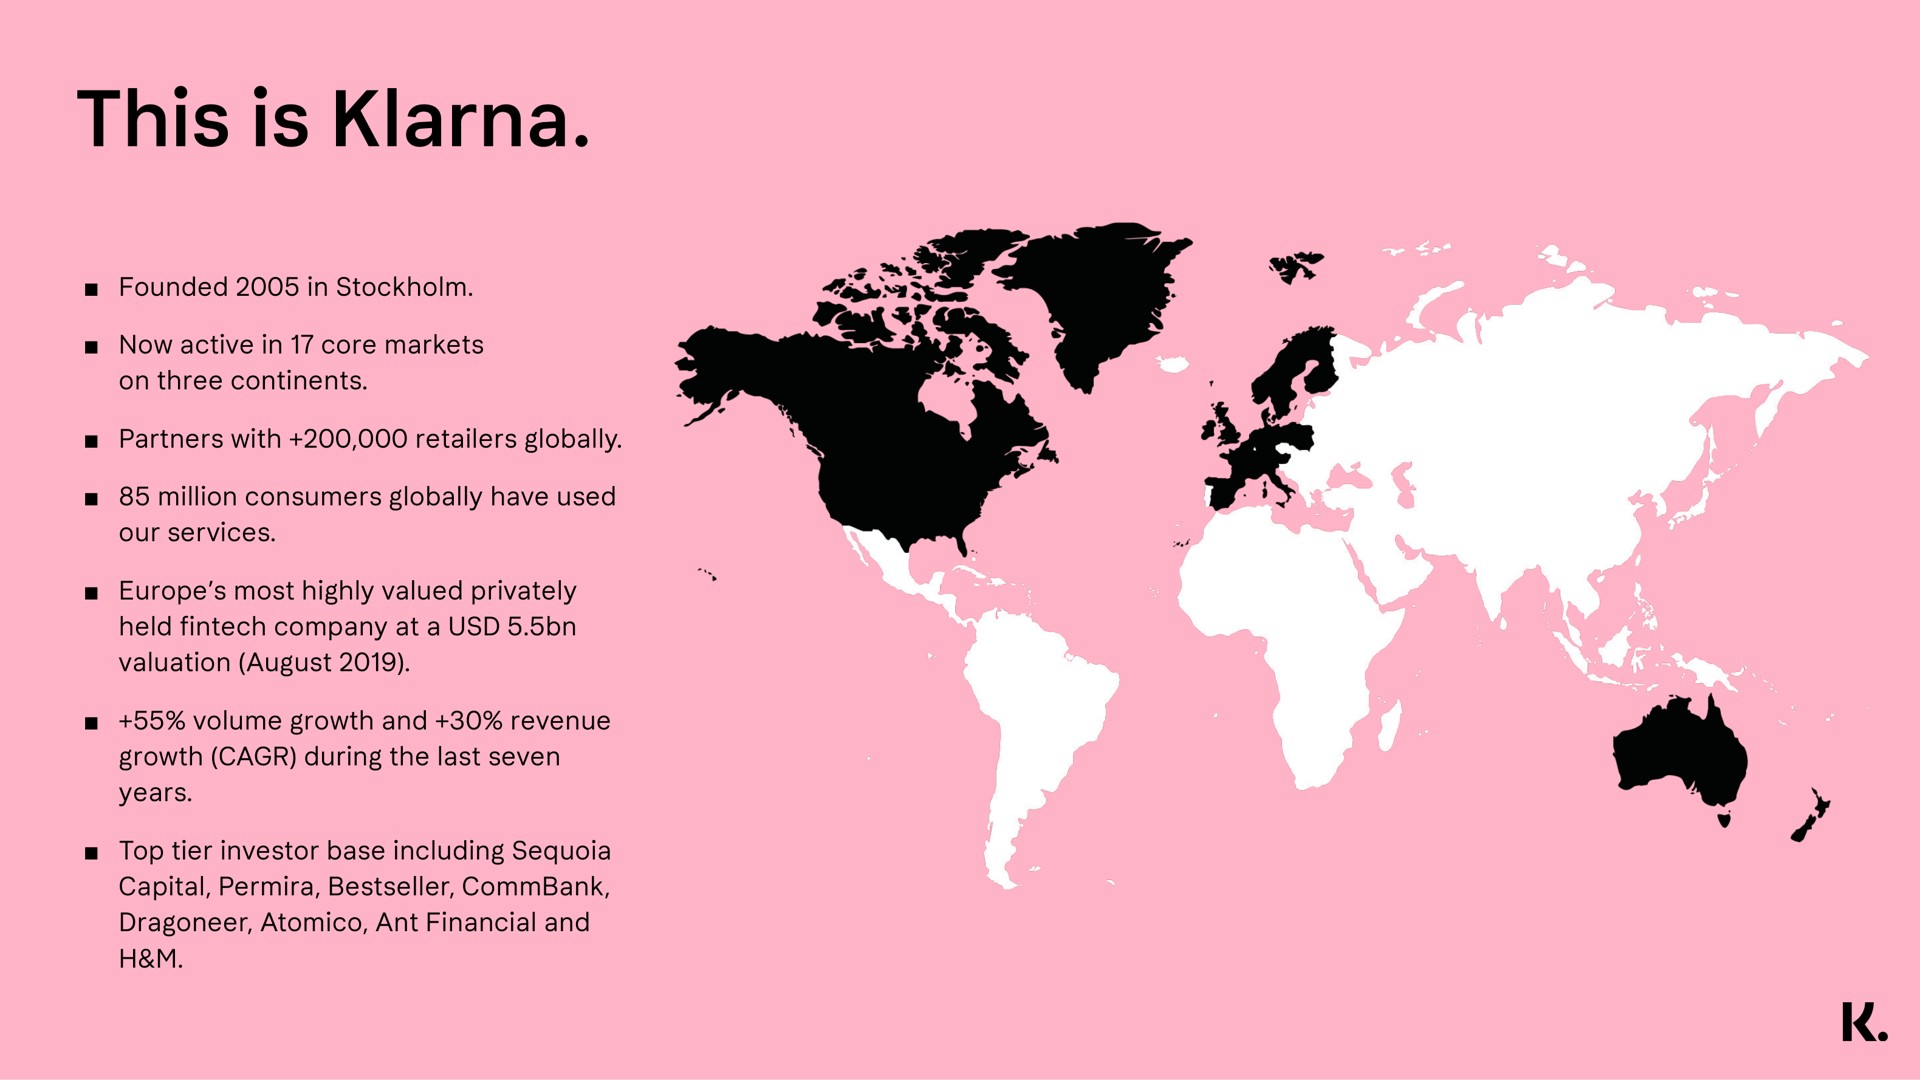 founded in now active in core markets on three continents partners with retailers globally million consumers globally have used our services most highly valued privately held company at a valuation august volume growth and revenue growth during the last seven years top tier investor base including capital ant financial and this is | Klarna